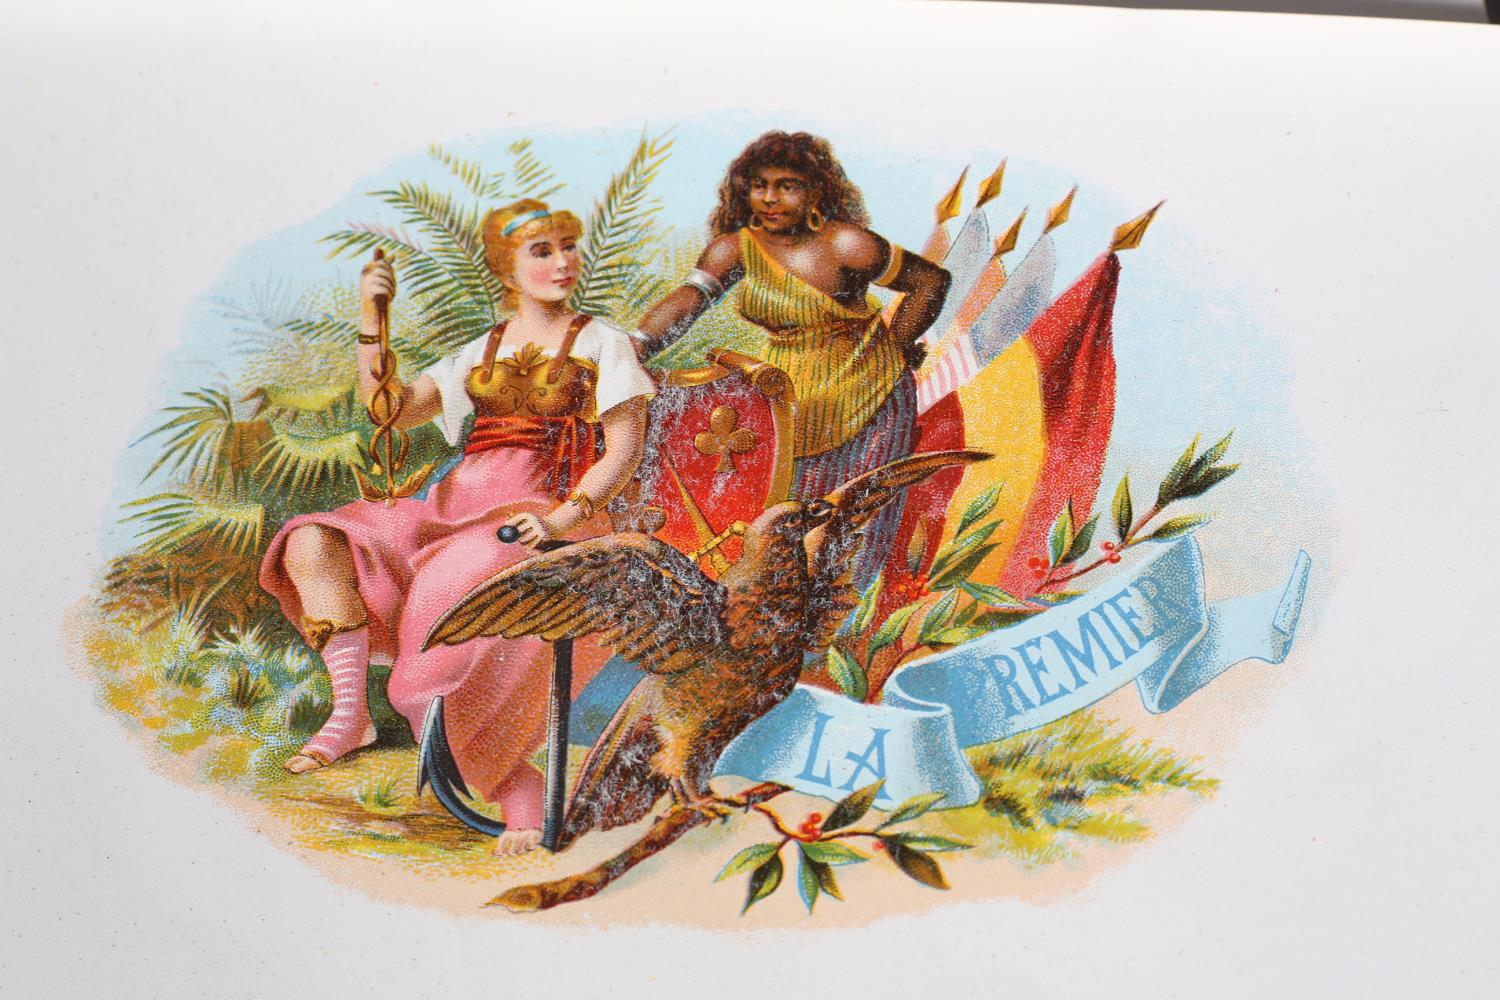 A large quantity of vintage chromolithographic and gilt printed cigar box labels, some with embossed - Image 8 of 8